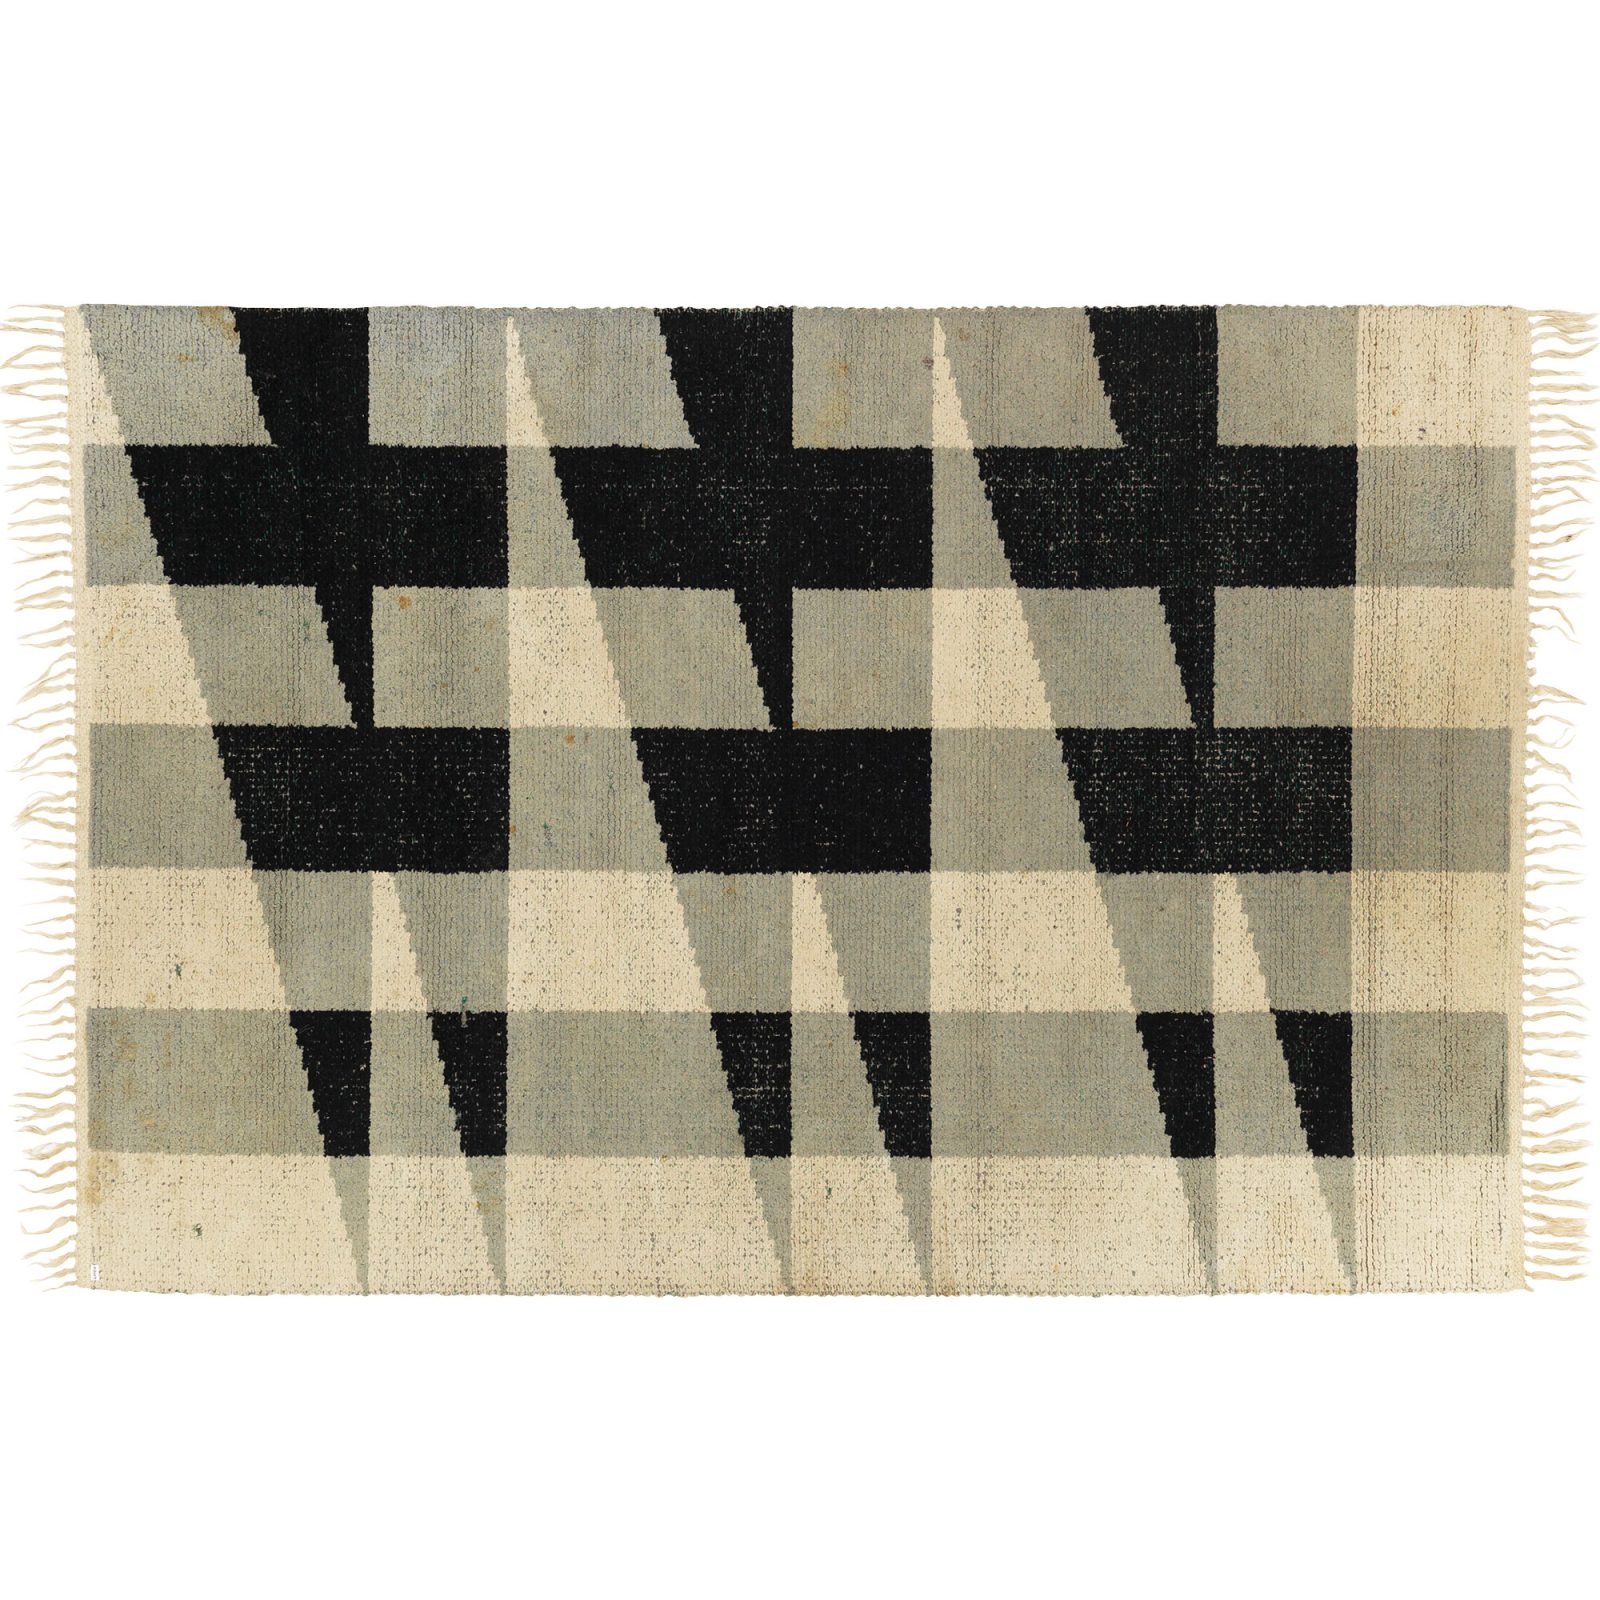 Rug with abstract pattern in grey, black and white.